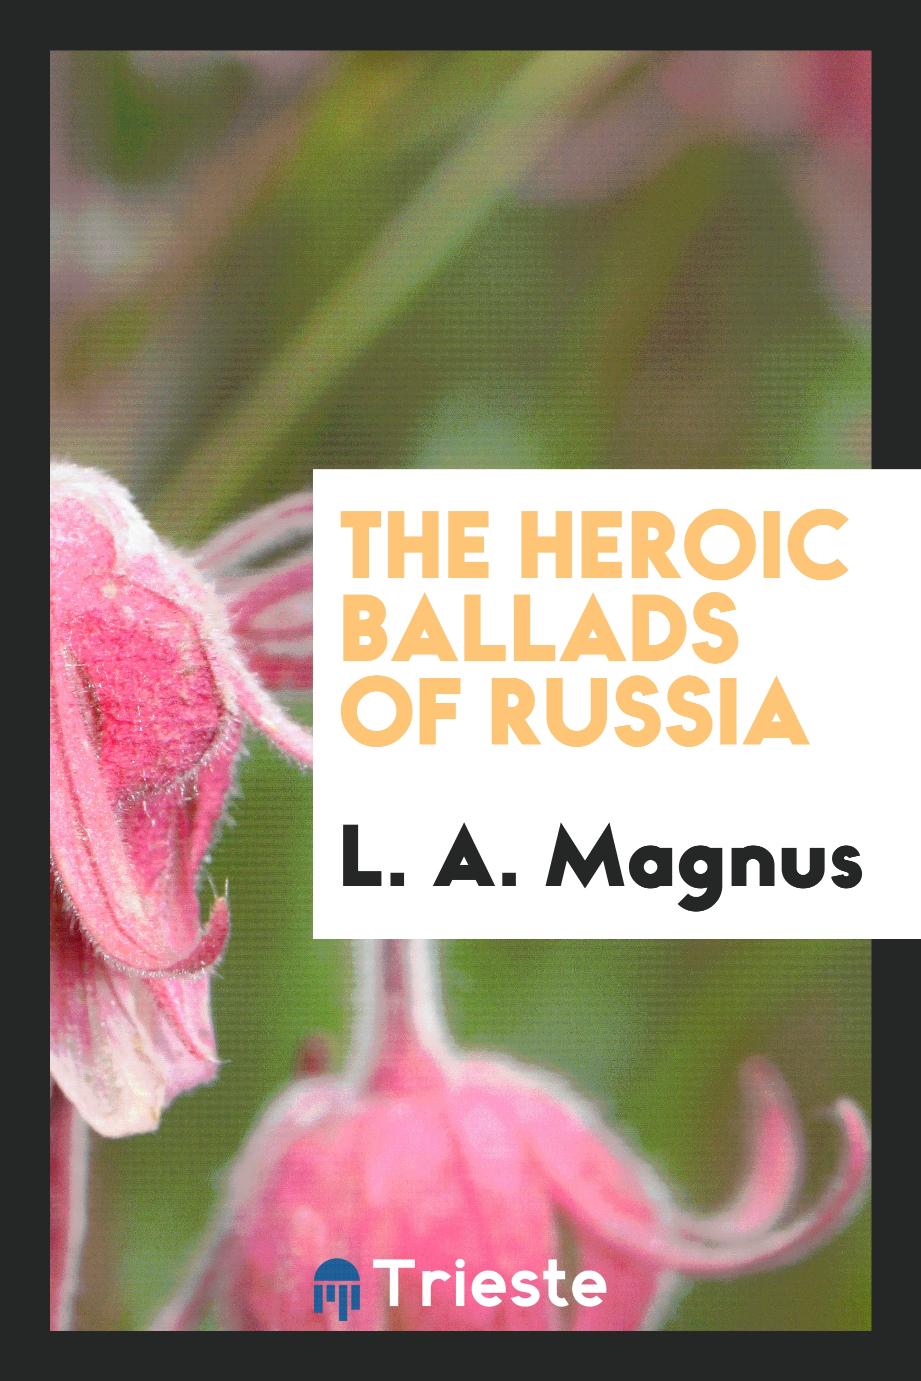 The heroic ballads of Russia